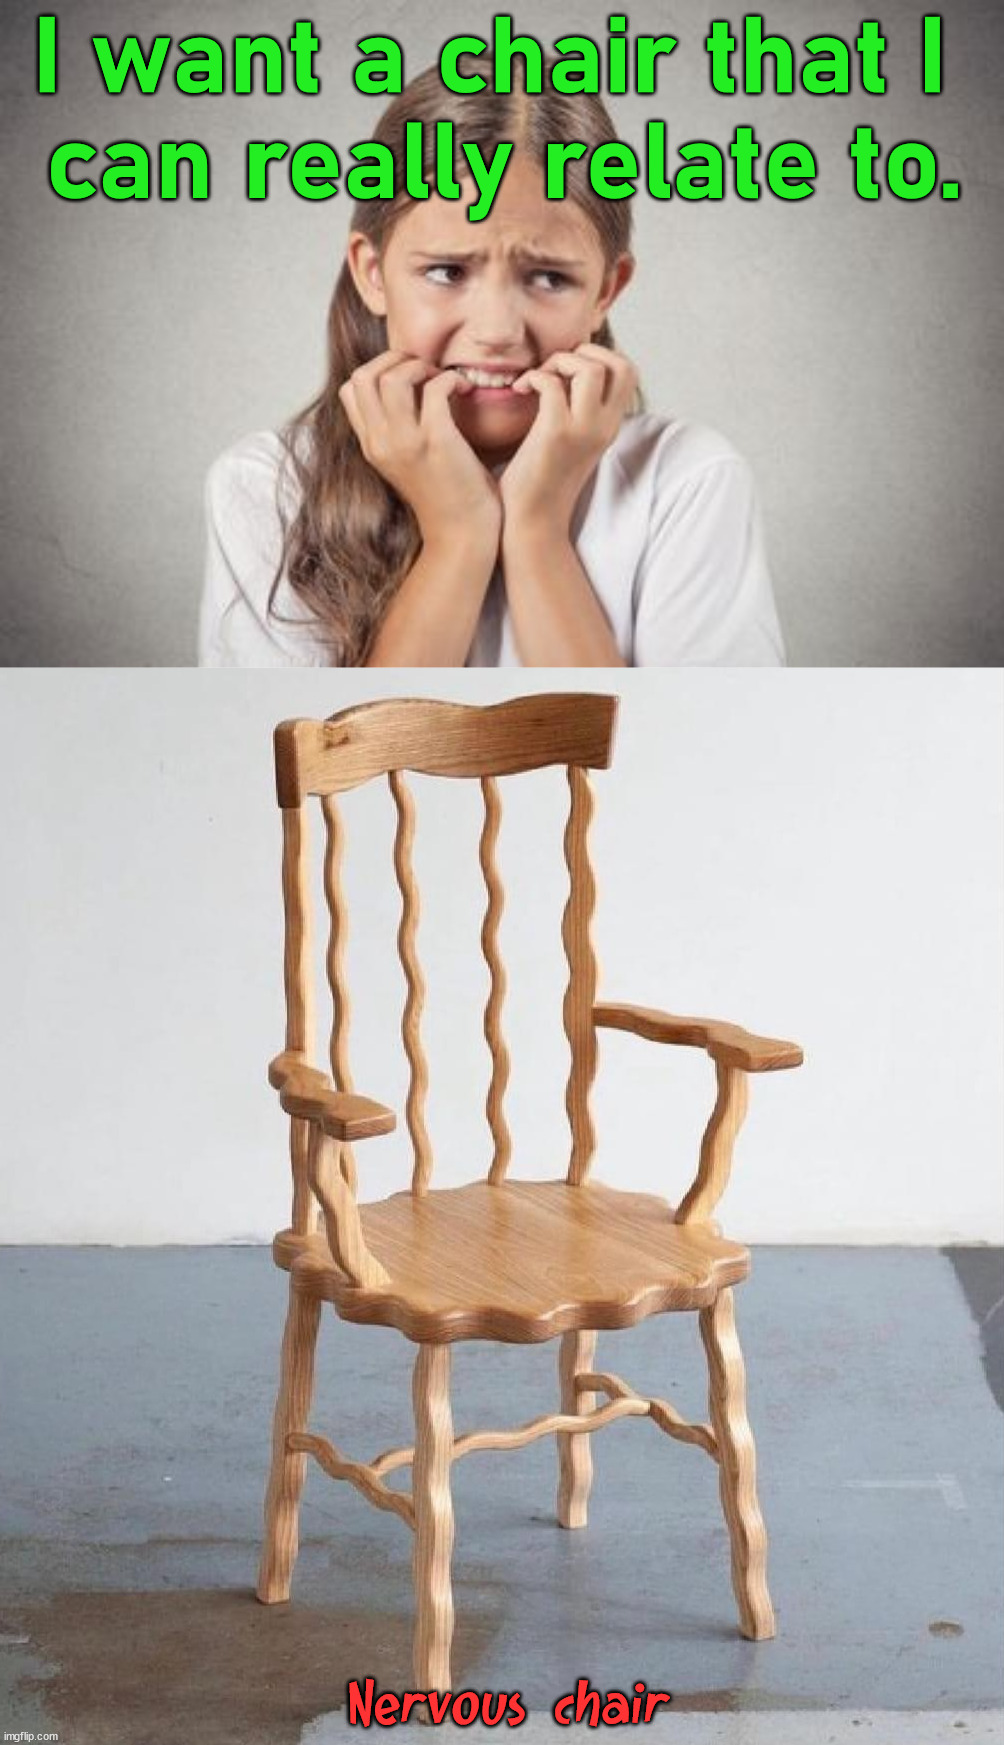 So relateable that it makes me nervous. |  I want a chair that I 
can really relate to. Nervous chair | image tagged in nervous woman,relateable | made w/ Imgflip meme maker